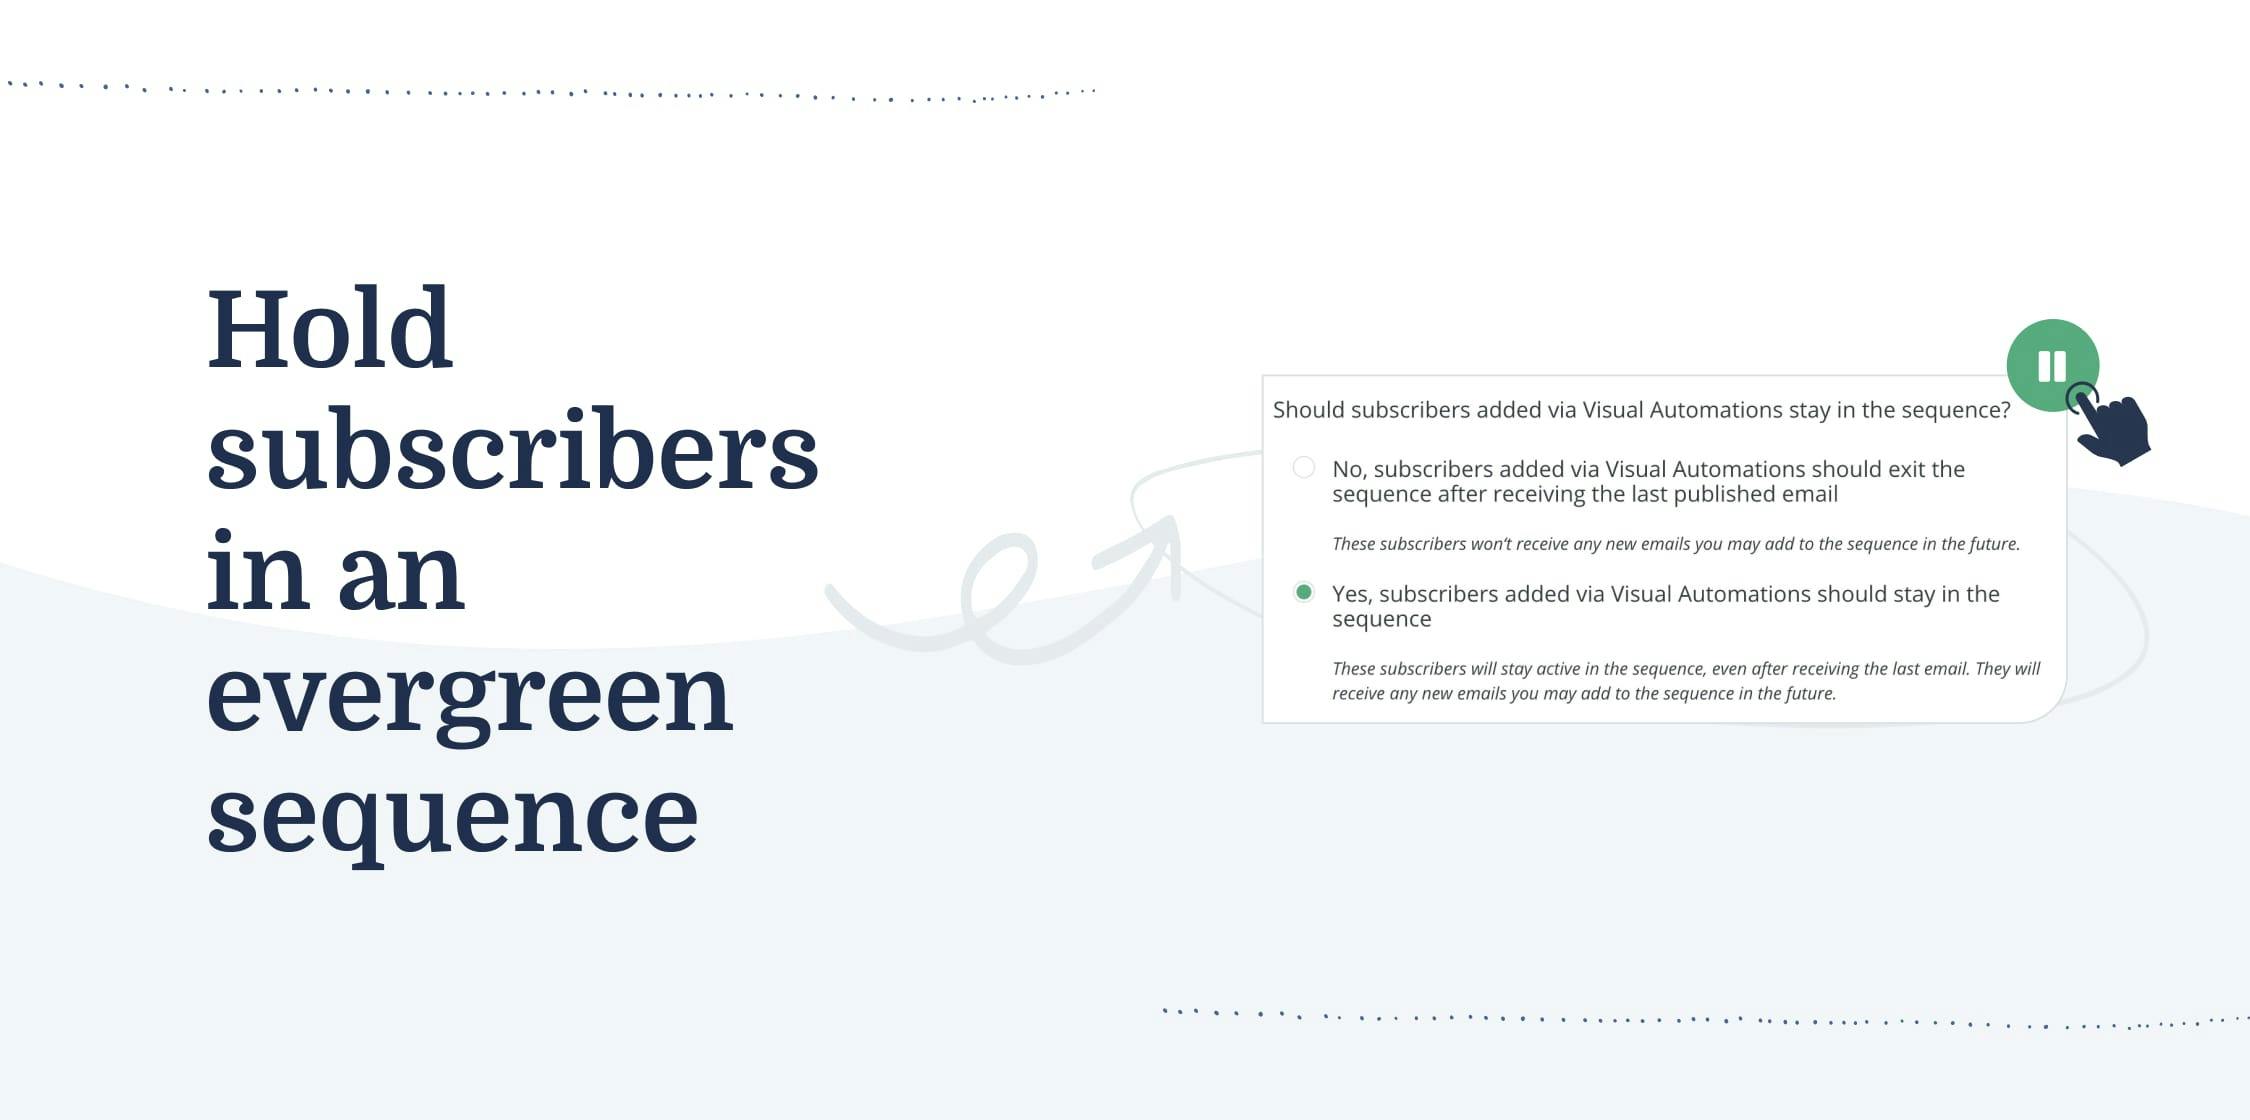 Learn more about holding subscribers in sequences